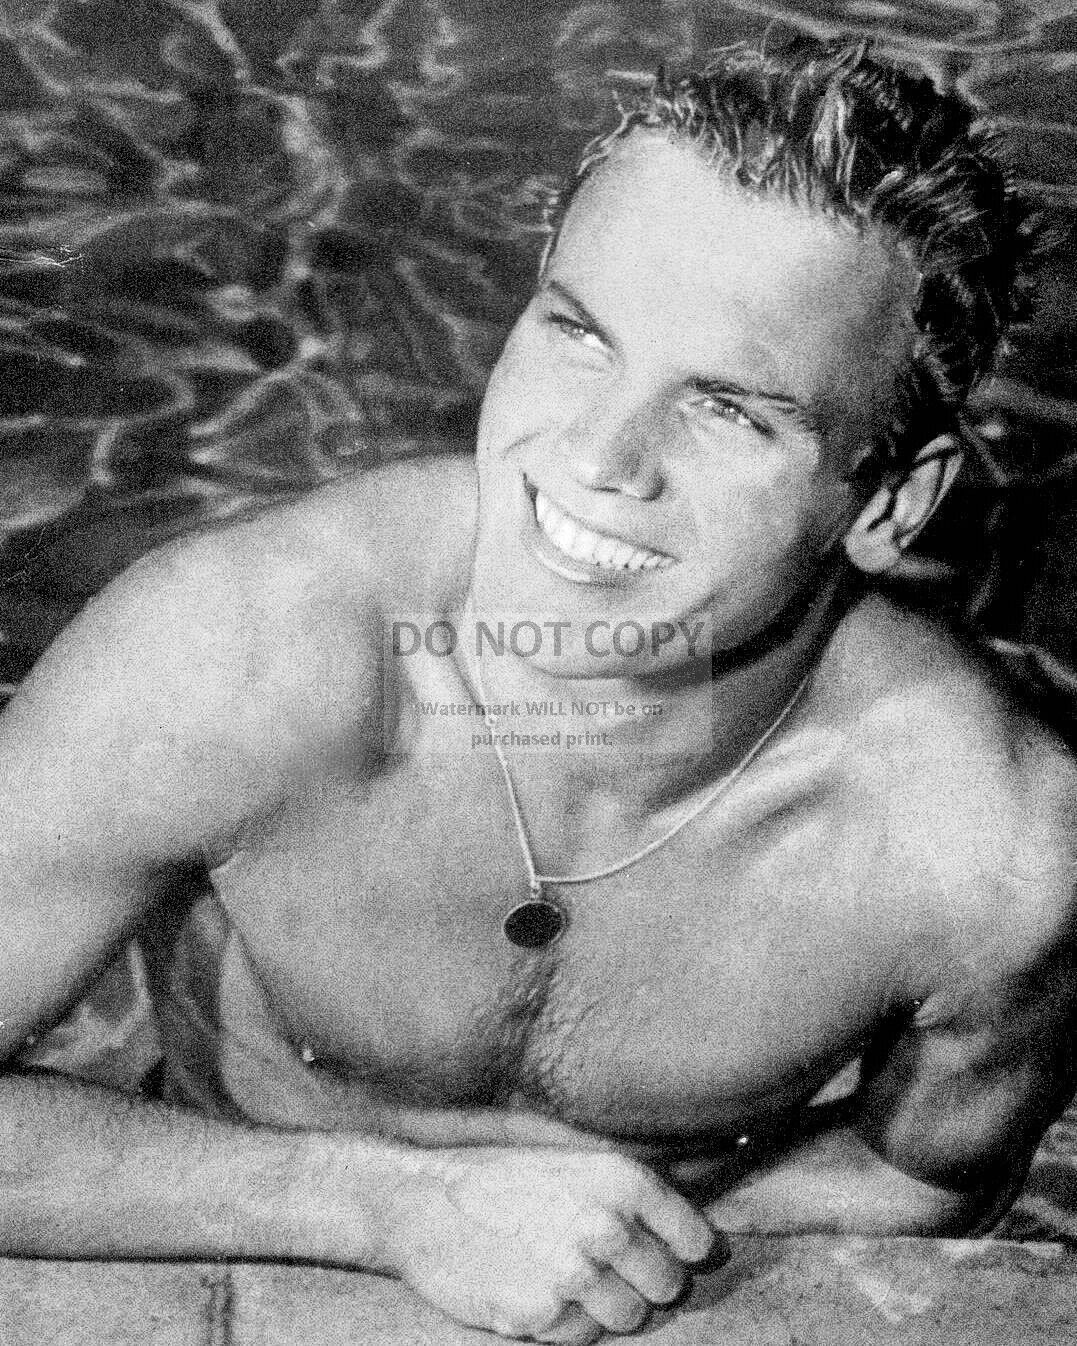 ACTOR TAB HUNTER PIN UP - 8X10 PUBLICITY PHOTO (DD349)